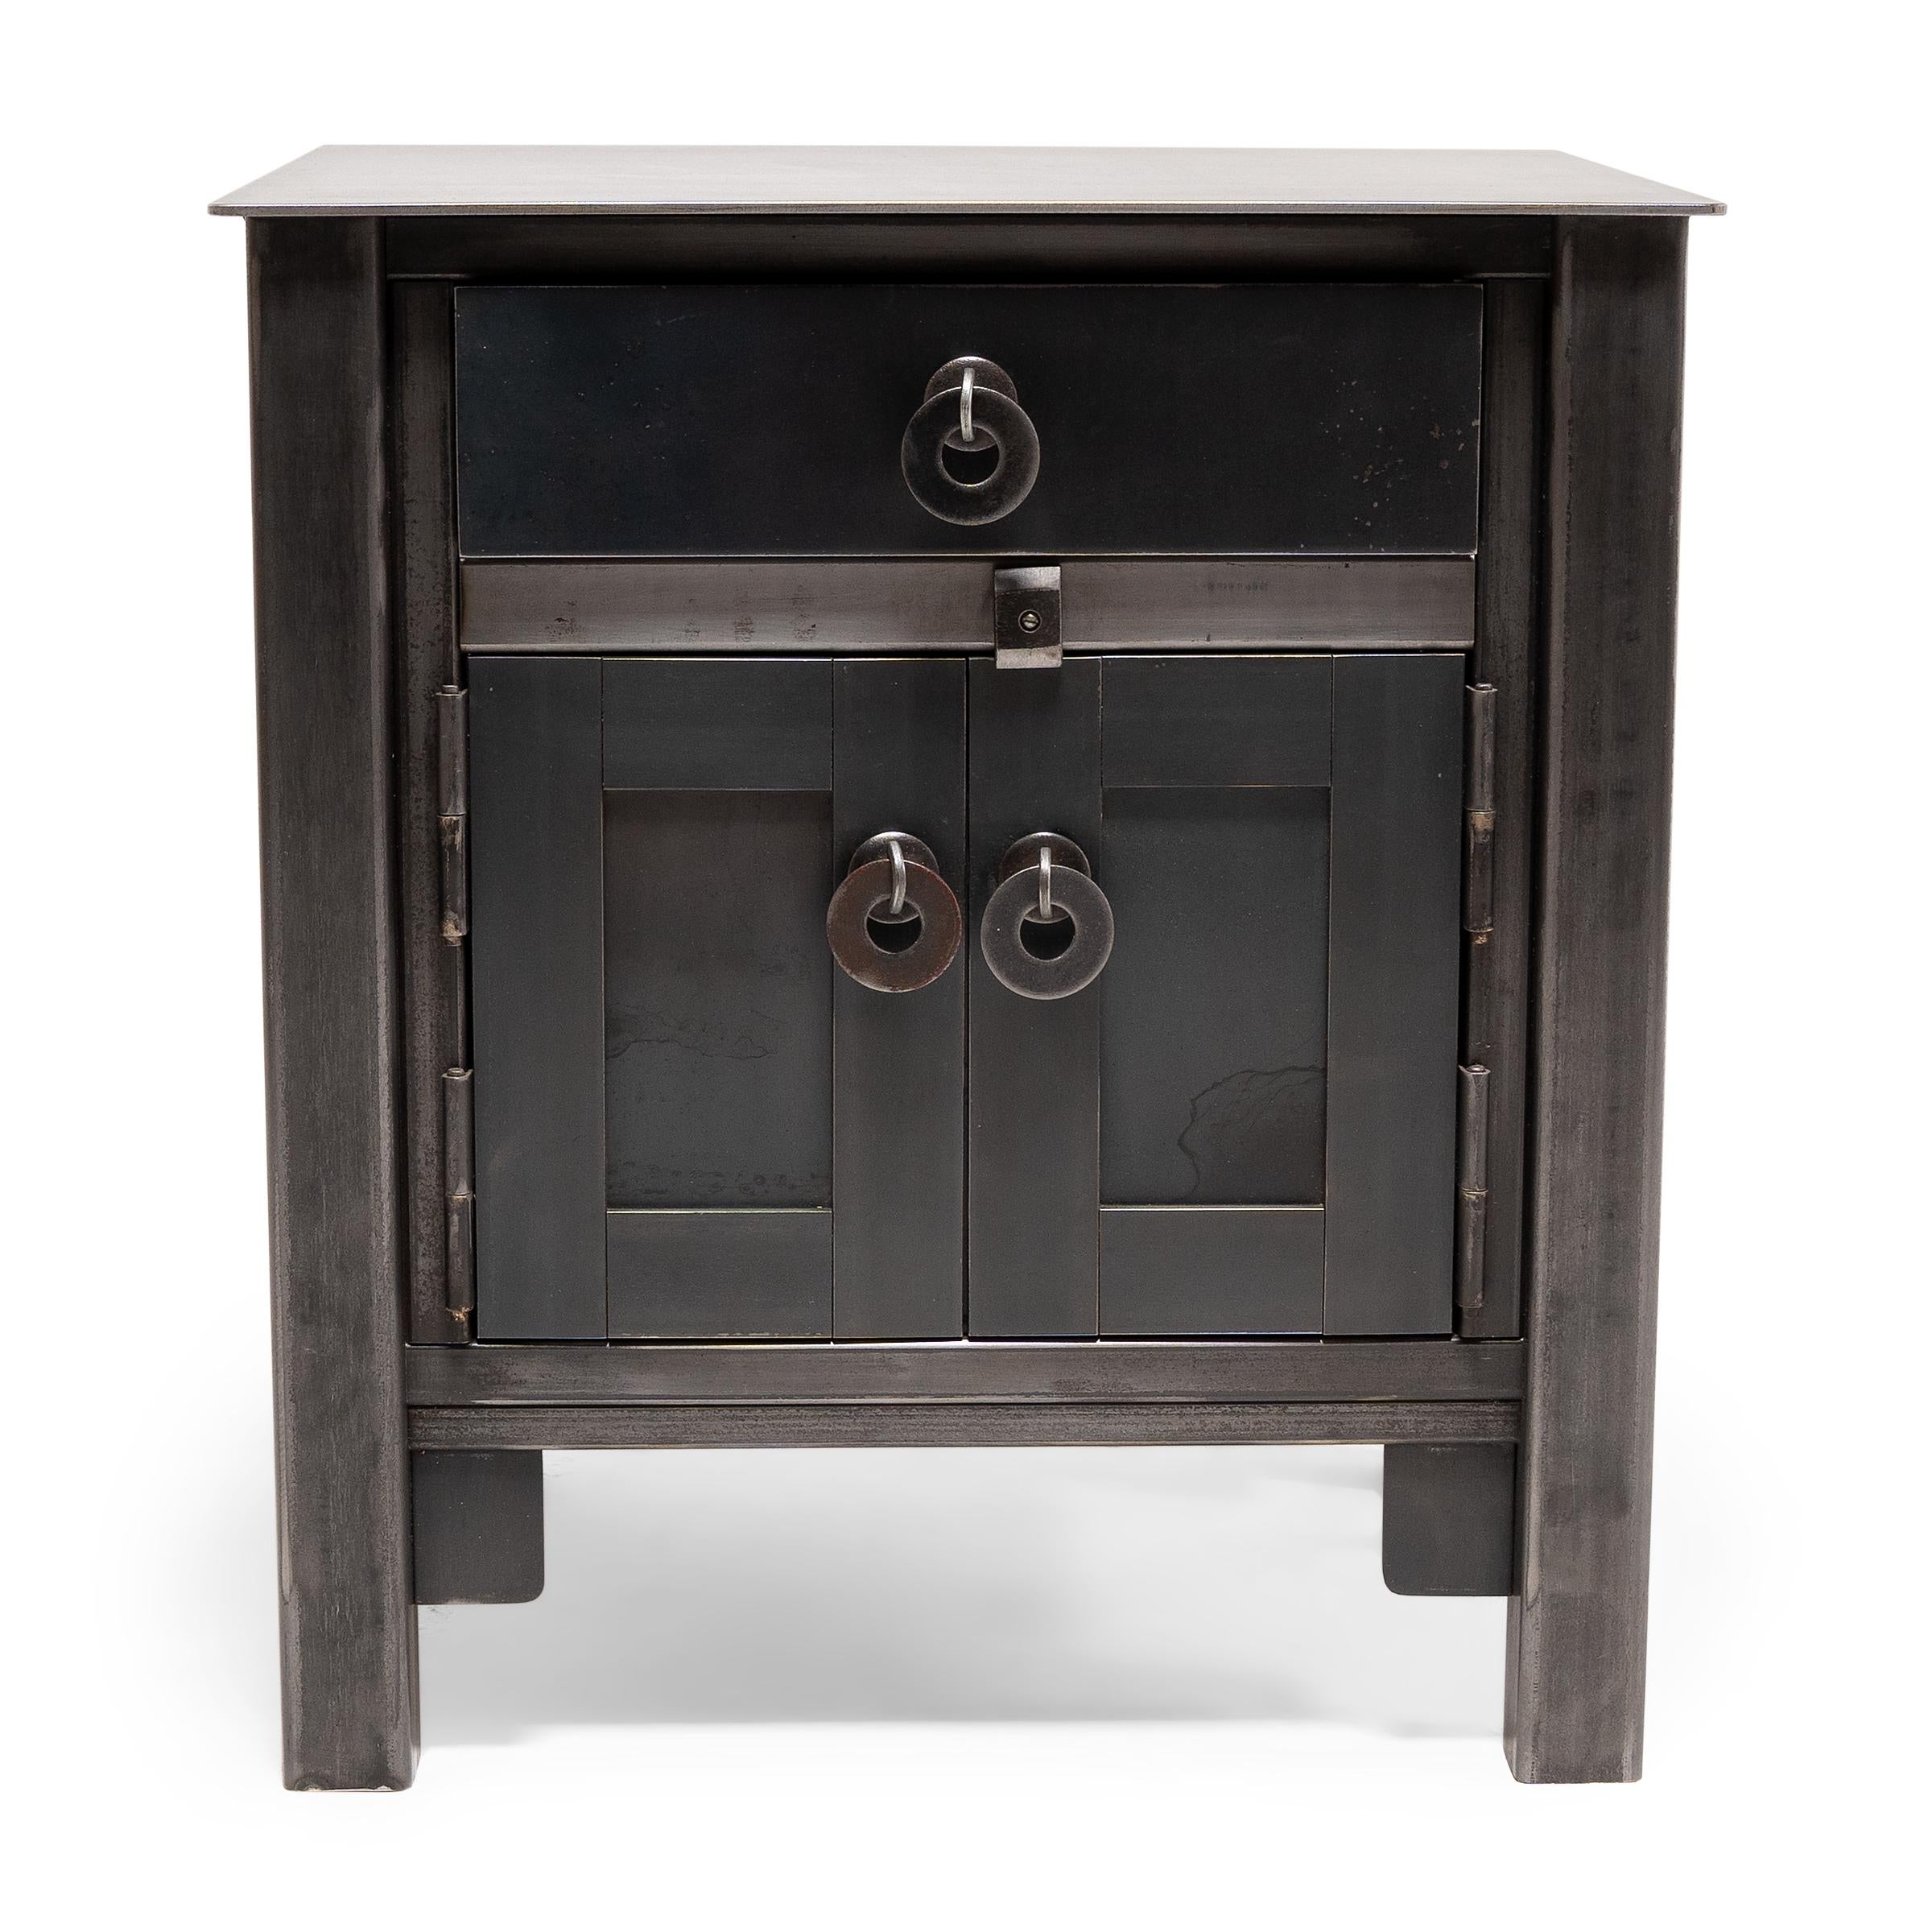 Created exclusively for PAGODA RED, the Ming Steel Collection by artist Jim Rose forges a connection between Shaker minimalism and the simplified lines of Ming-dynasty furniture. The culmination of years of studying the vernacular history of